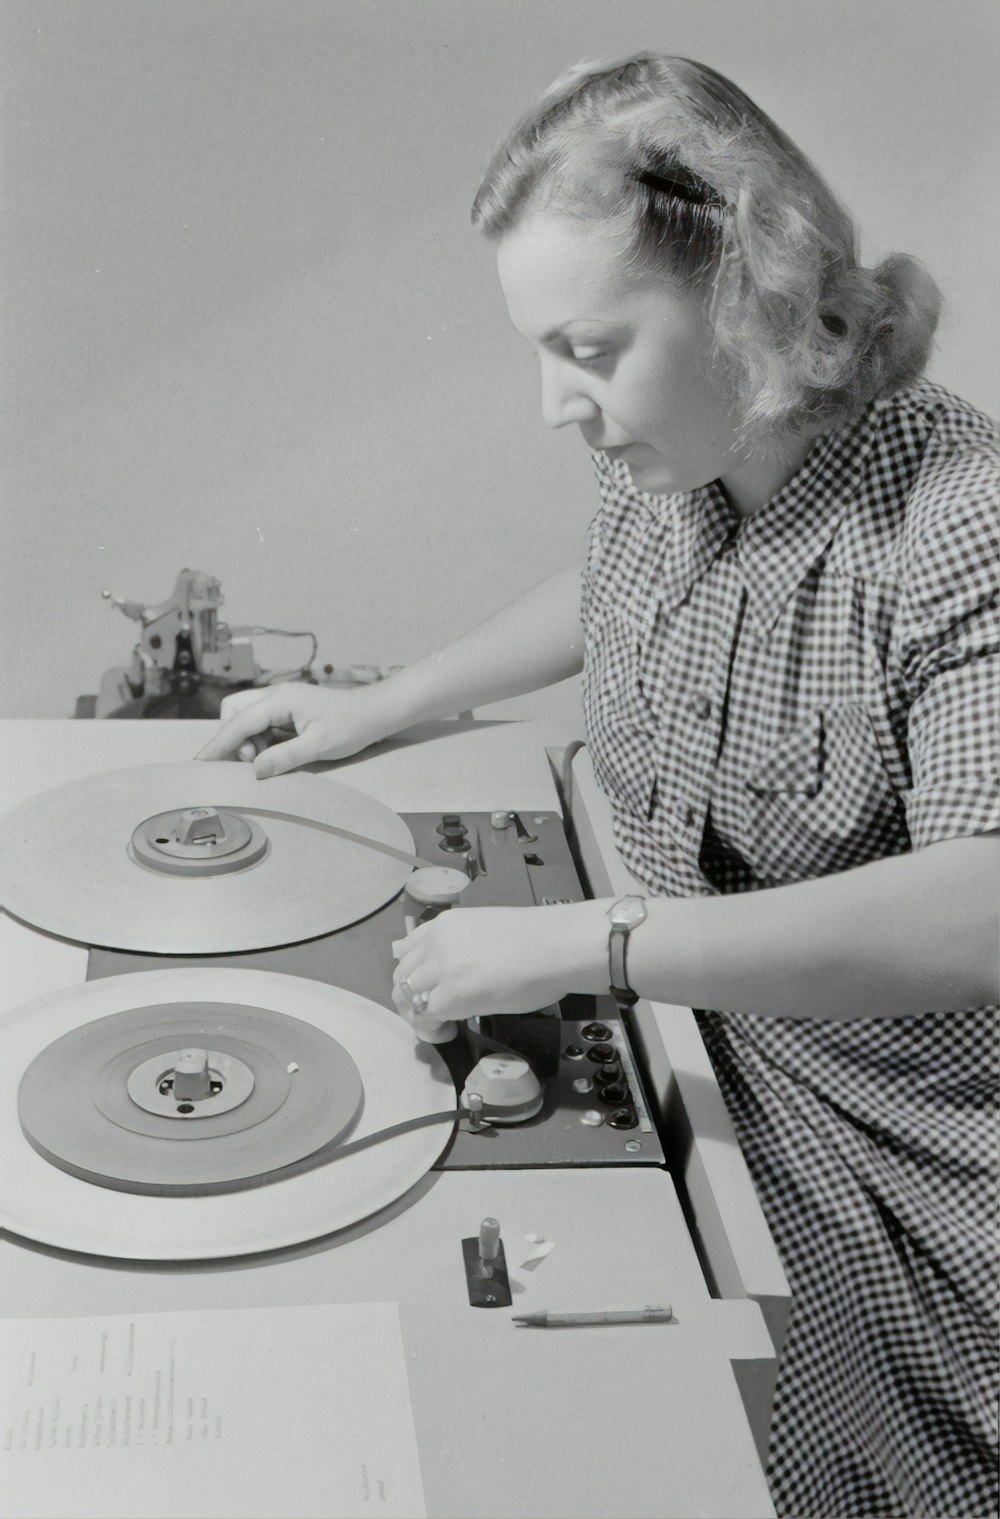 man in black and white checkered button up shirt playing dj turntable